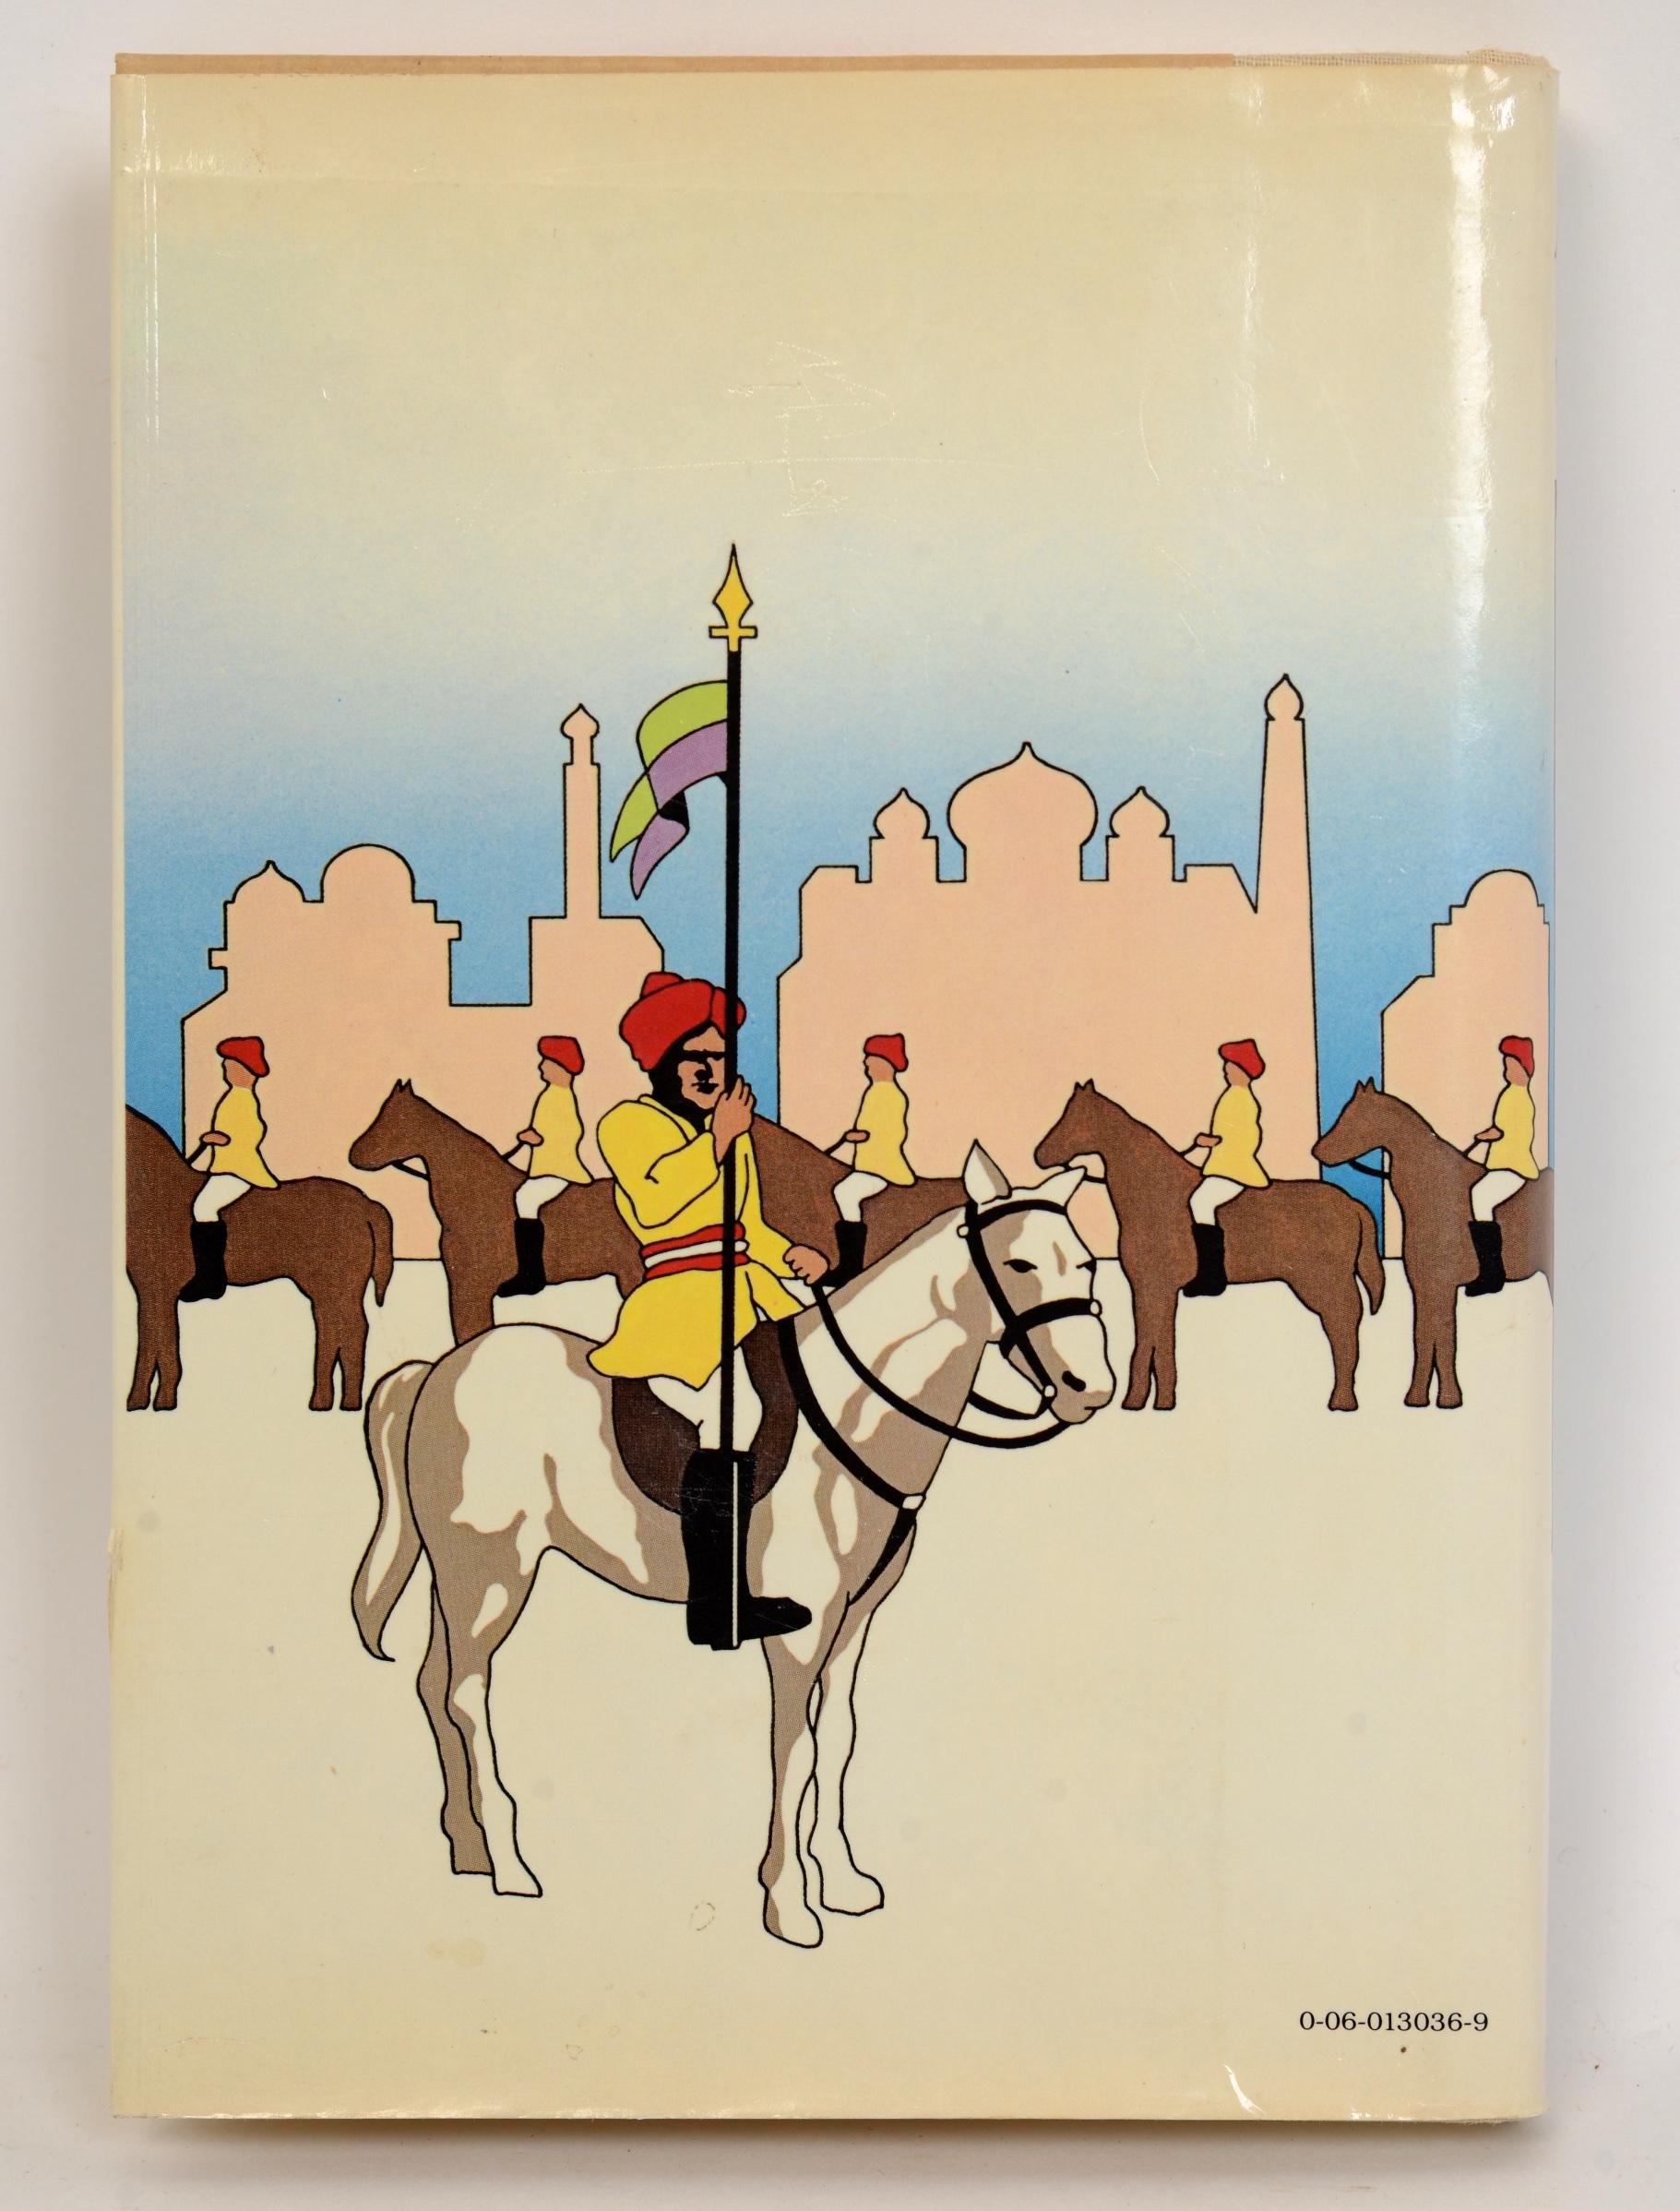 Skinner's Horse by Philip Mason. Harper & Row, New York, 1979. Stated First American Edition hardcover with dust jacket. James Skinner, a half-caste officer in early 19th century India, and his legendary guerrilla cavalry regiment accomplish